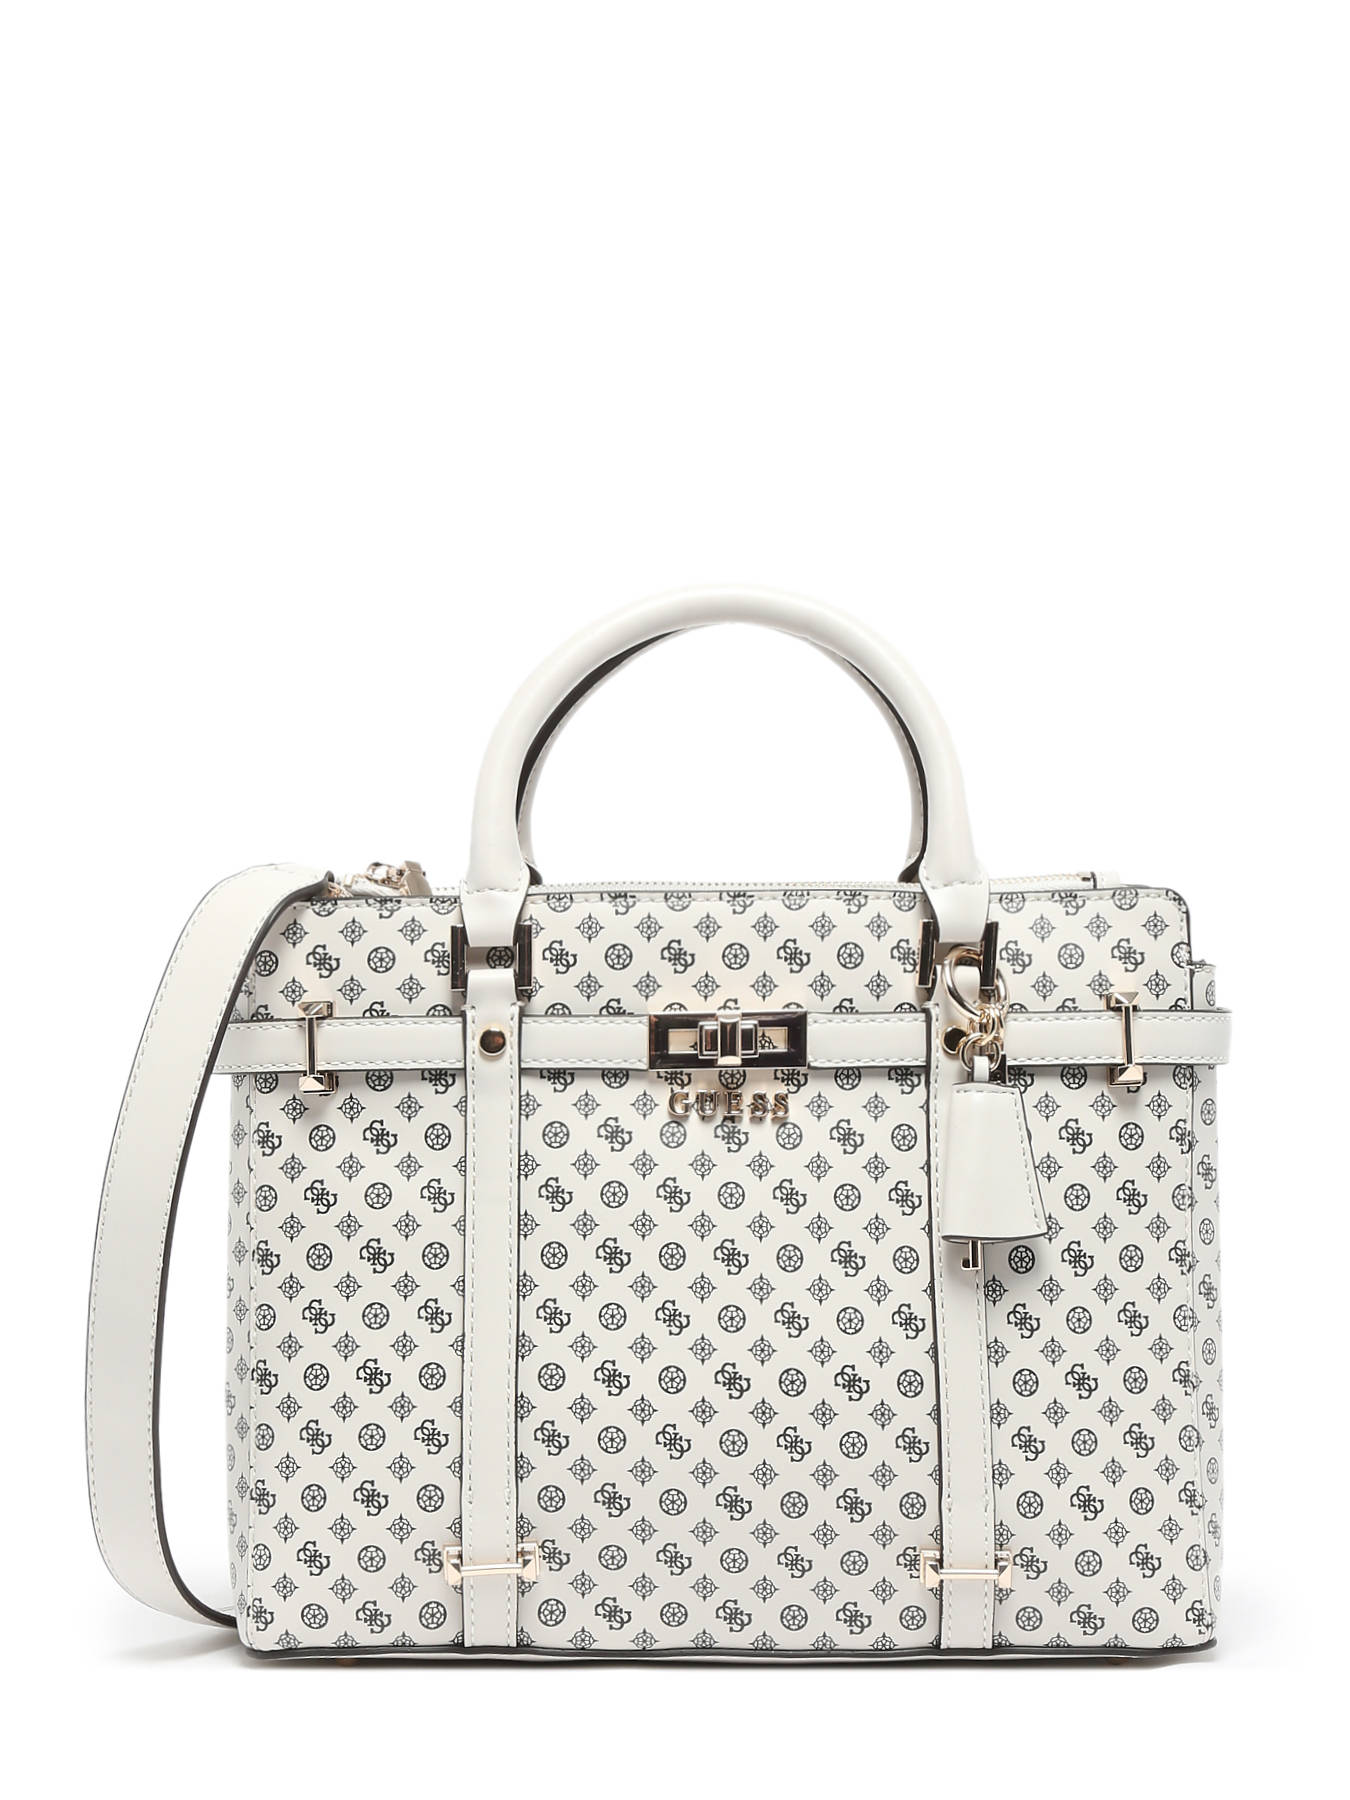 Shop Authentic Guess Bags Online In India At Tata CLiQ Luxury